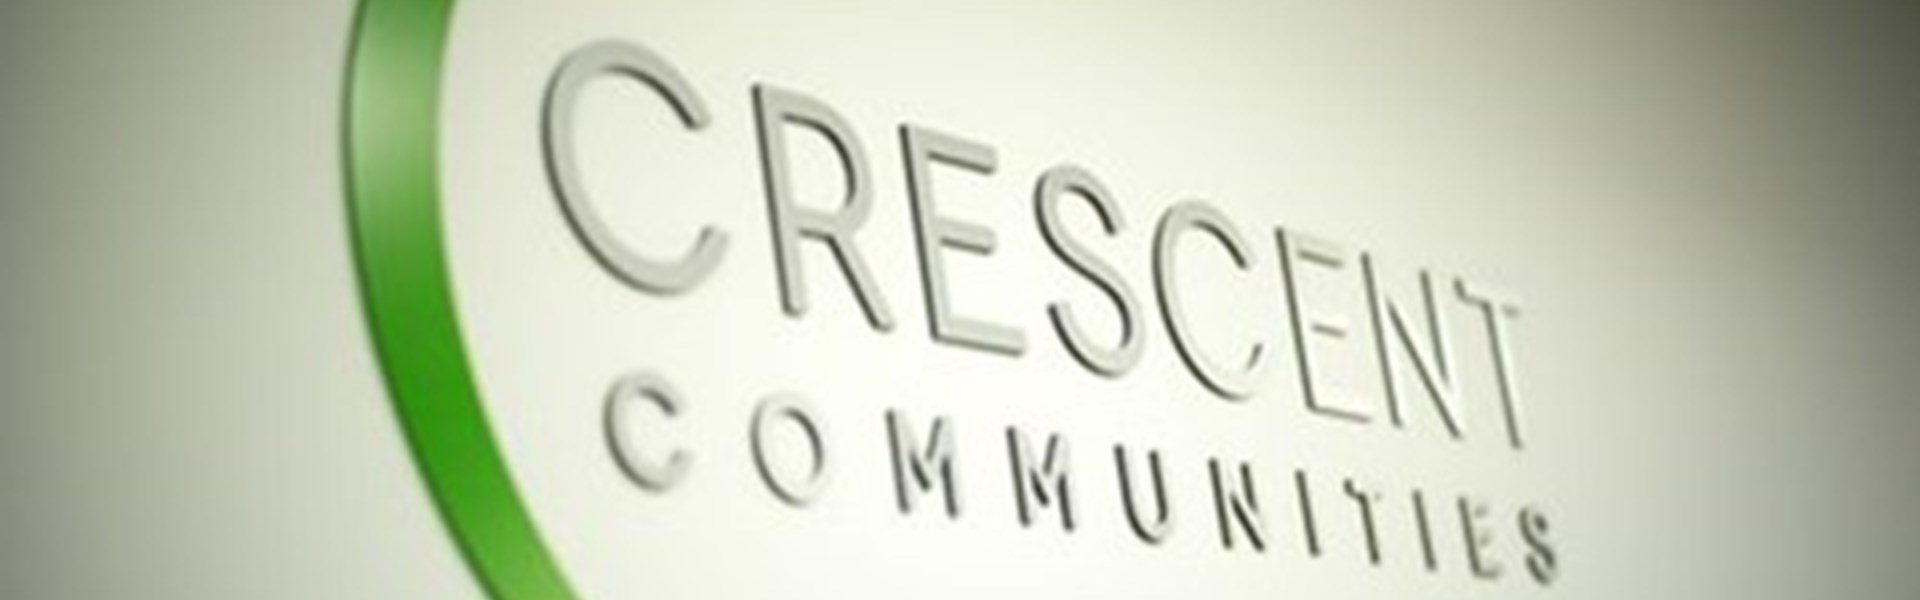 Crescent Communities Launches Real Estate Investment Management Business